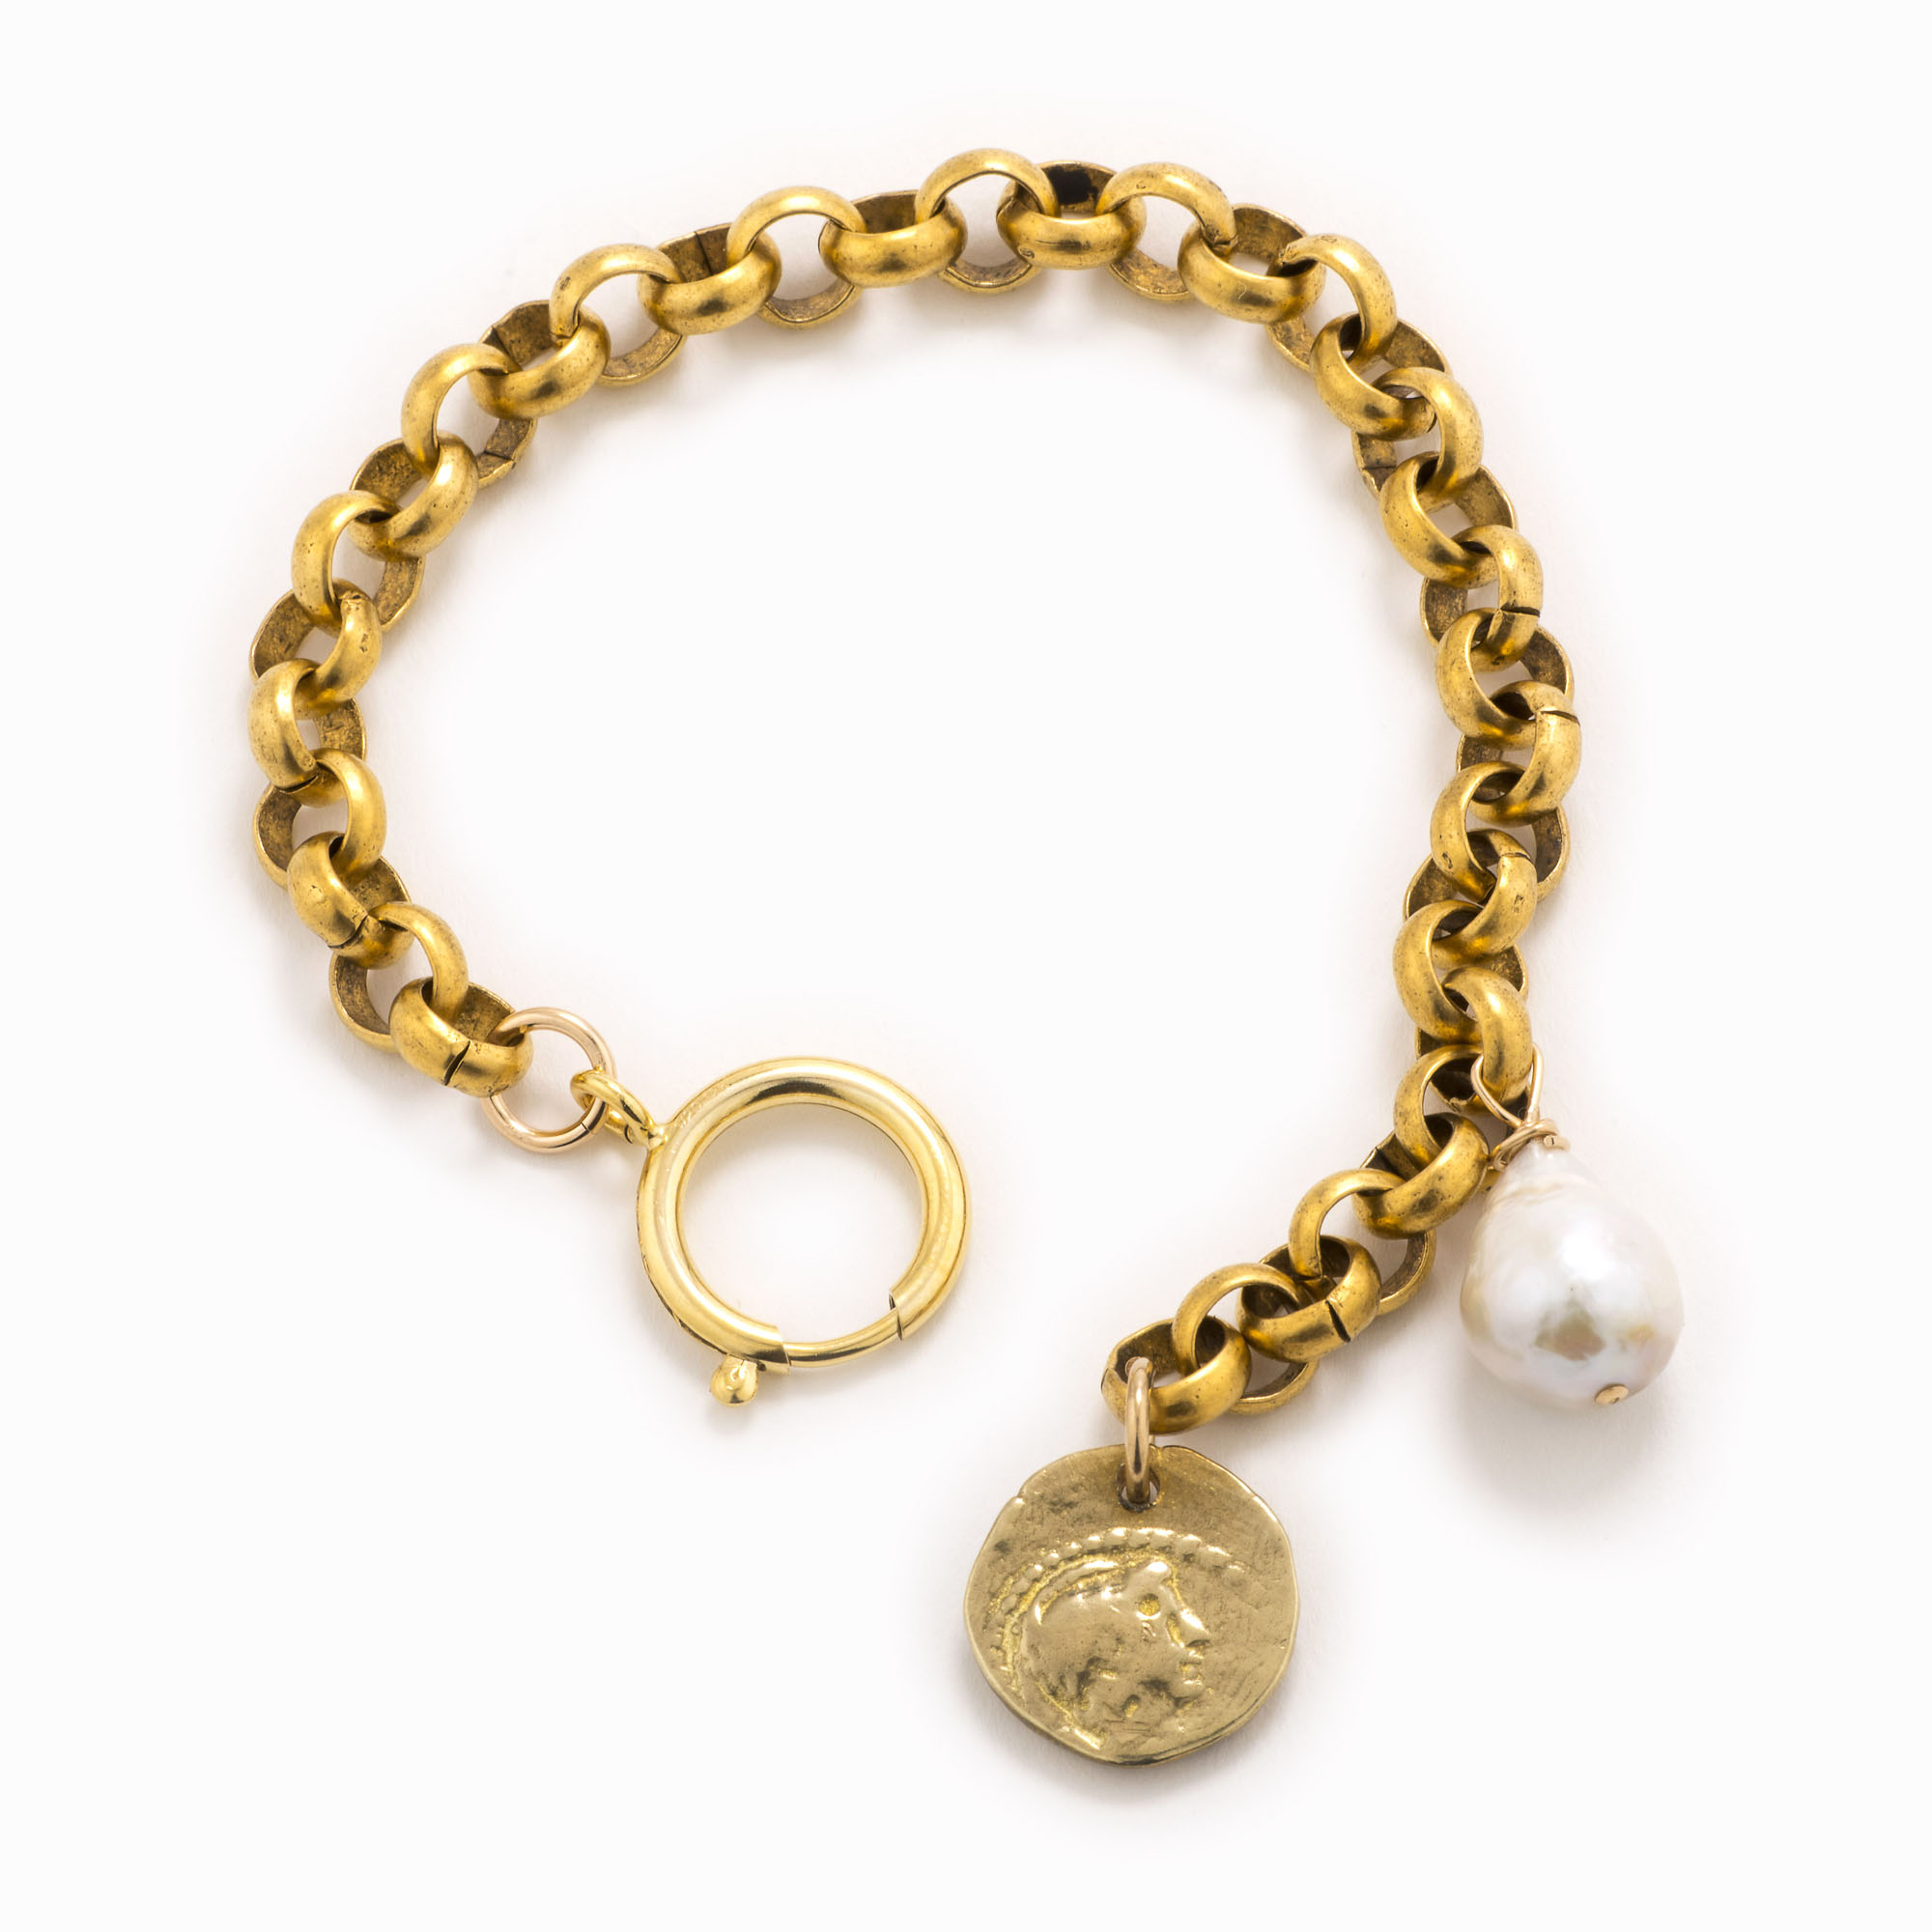 Featured image for “Quinn Brass Rolo Chain Bracelet”